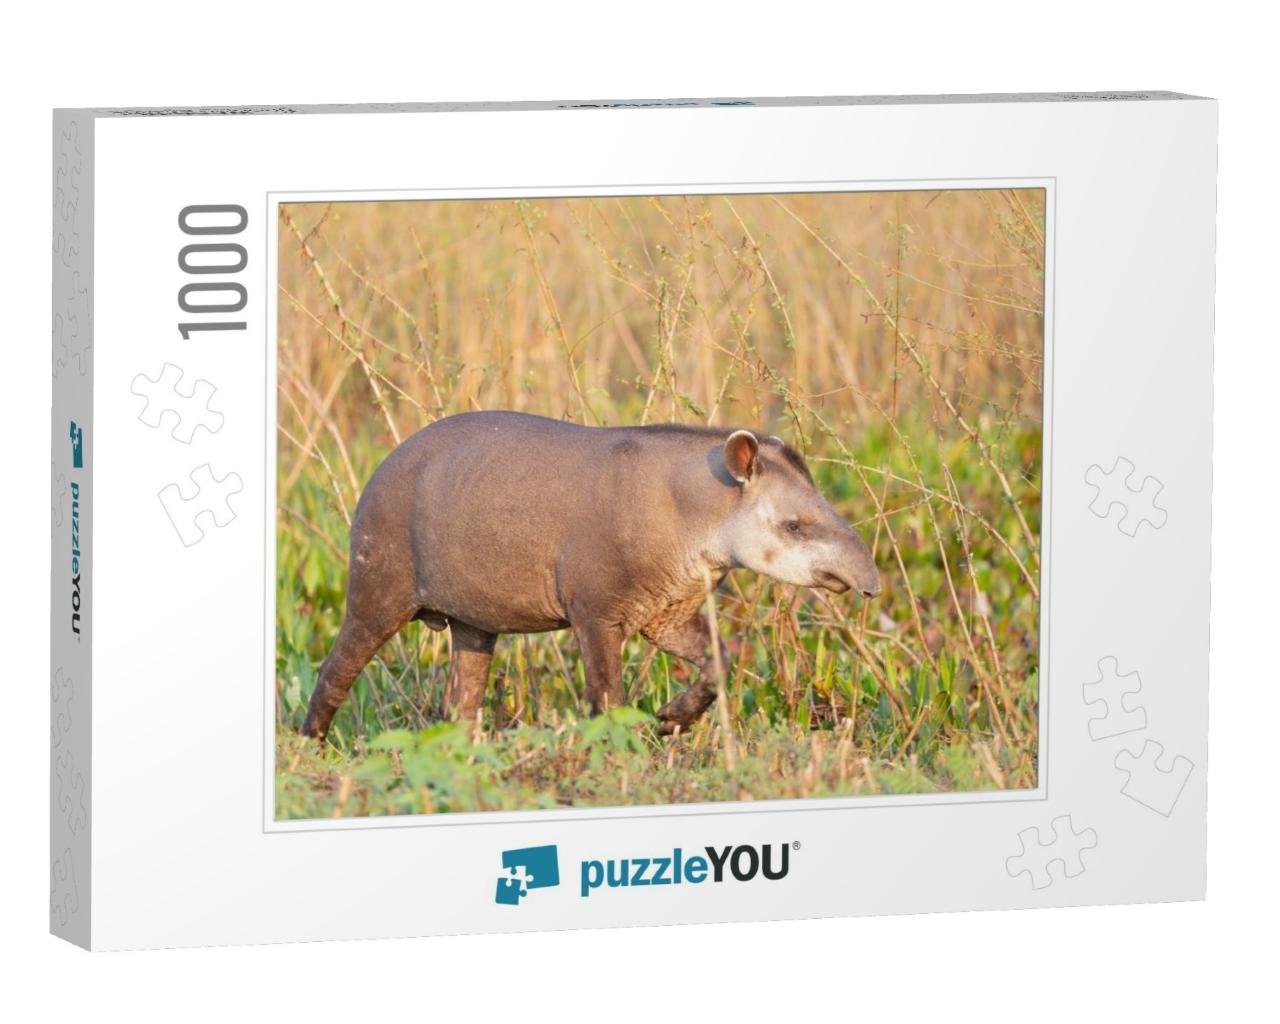 Tapir, Lowland Tapir in the Brazilian Jungle... Jigsaw Puzzle with 1000 pieces